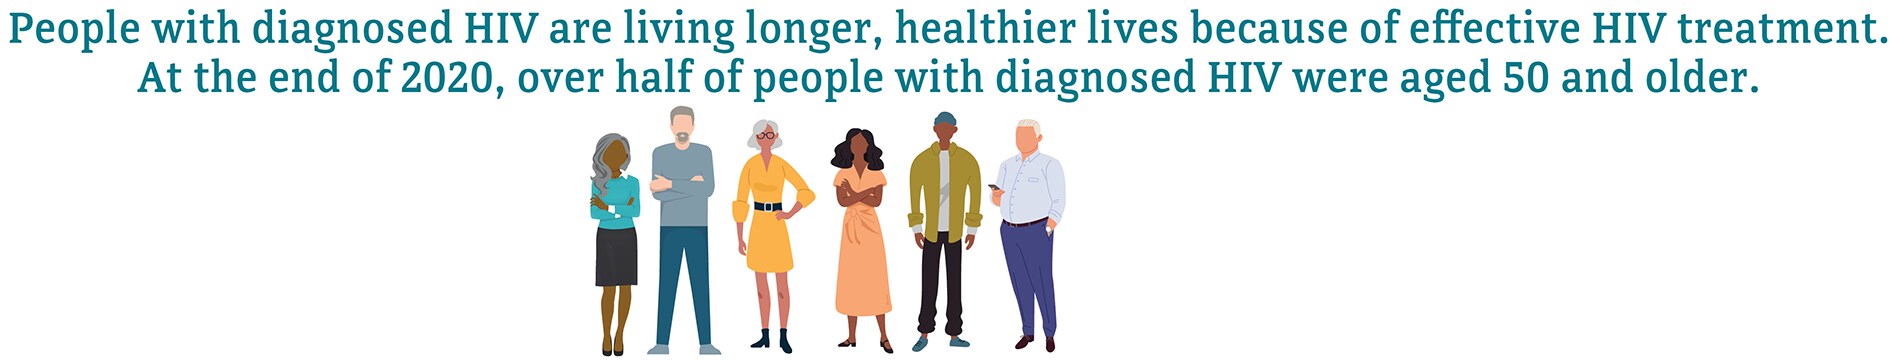 People with diagnosed HIV are living longer, healthier lives because of effective HIV treatment. At the end of 2020, over half of people with diagnosed HIV were aged 50 and older.